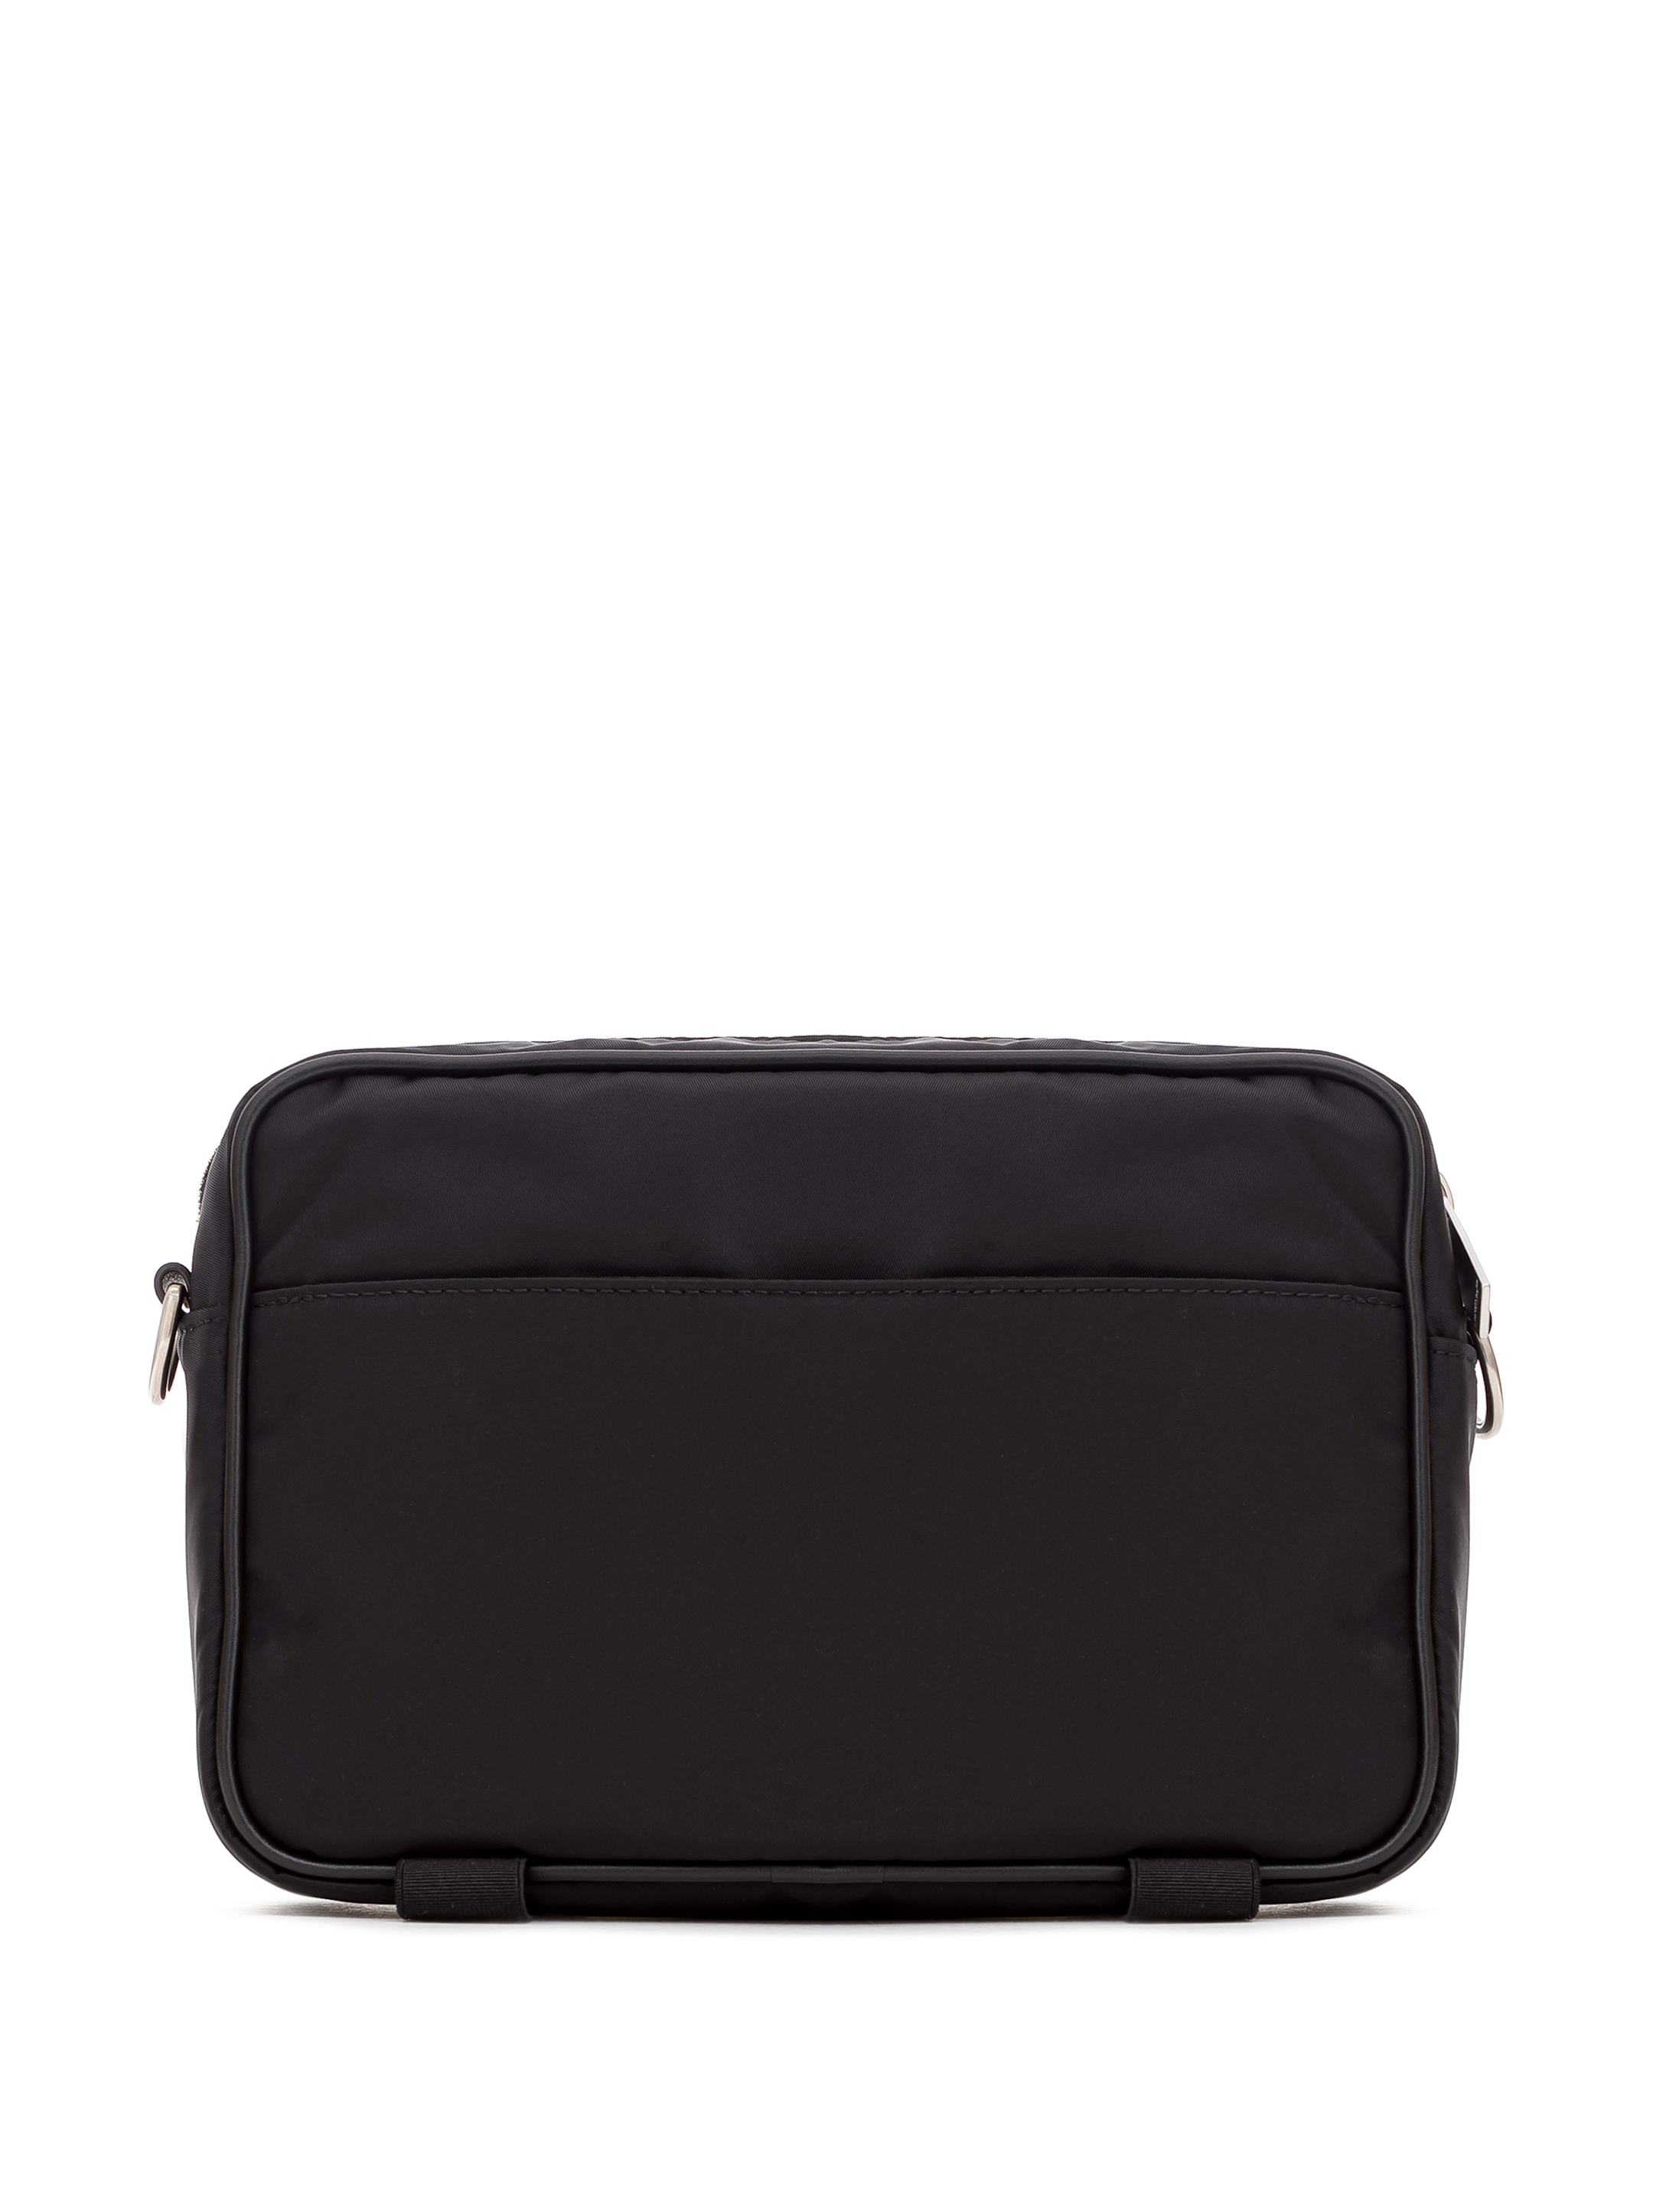 OFF-WHITE Courrier Camera Bag in Black